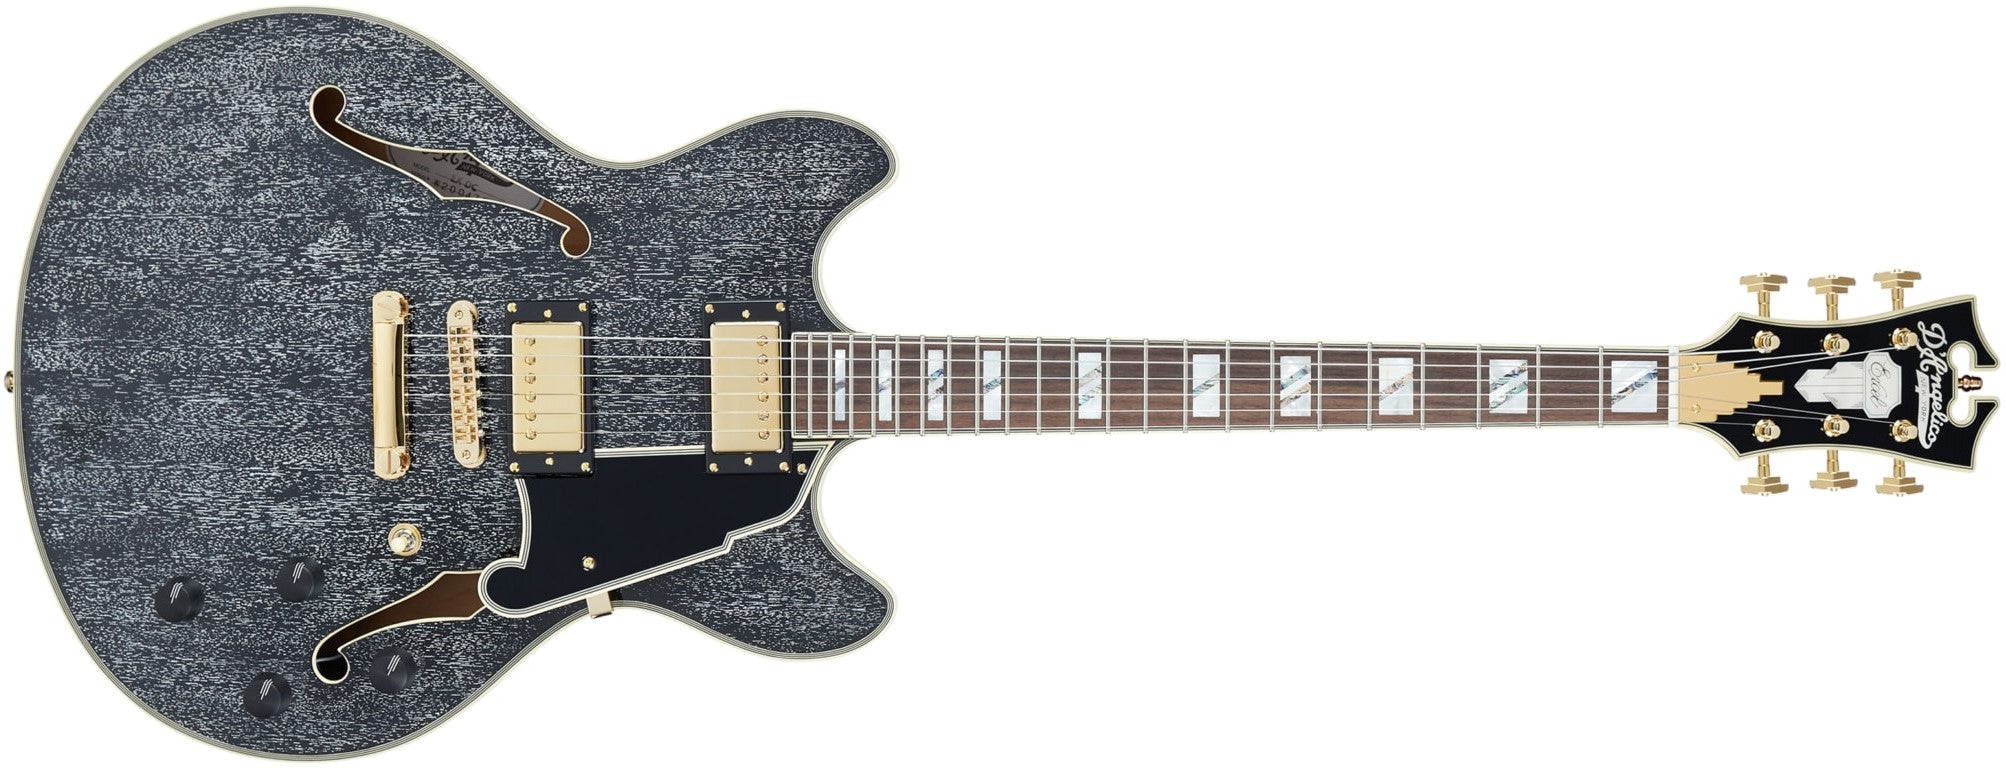 D'Angelico Excel DC Semi-hollowbody Electric Guitar With Stopbar Tailpiece Black Dog DAEDCBDGS